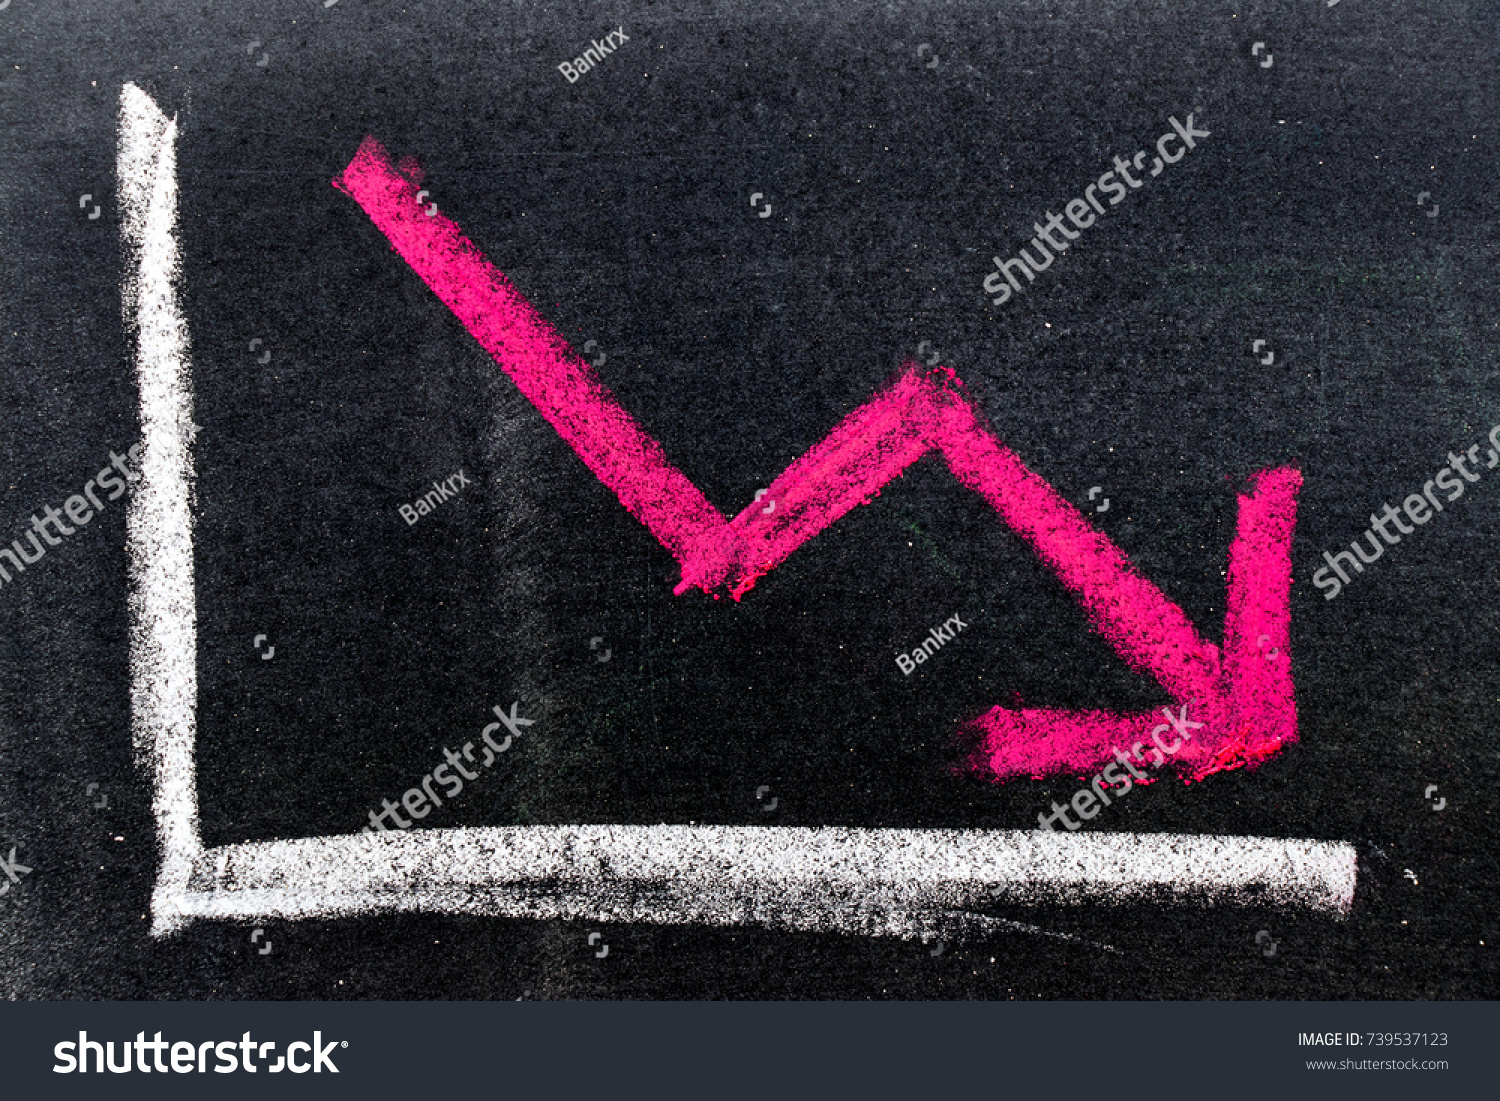 Red color hand drawing chalk in arrow down shape on black board background (Concept of stock decline, down trend of business, economy) #739537123